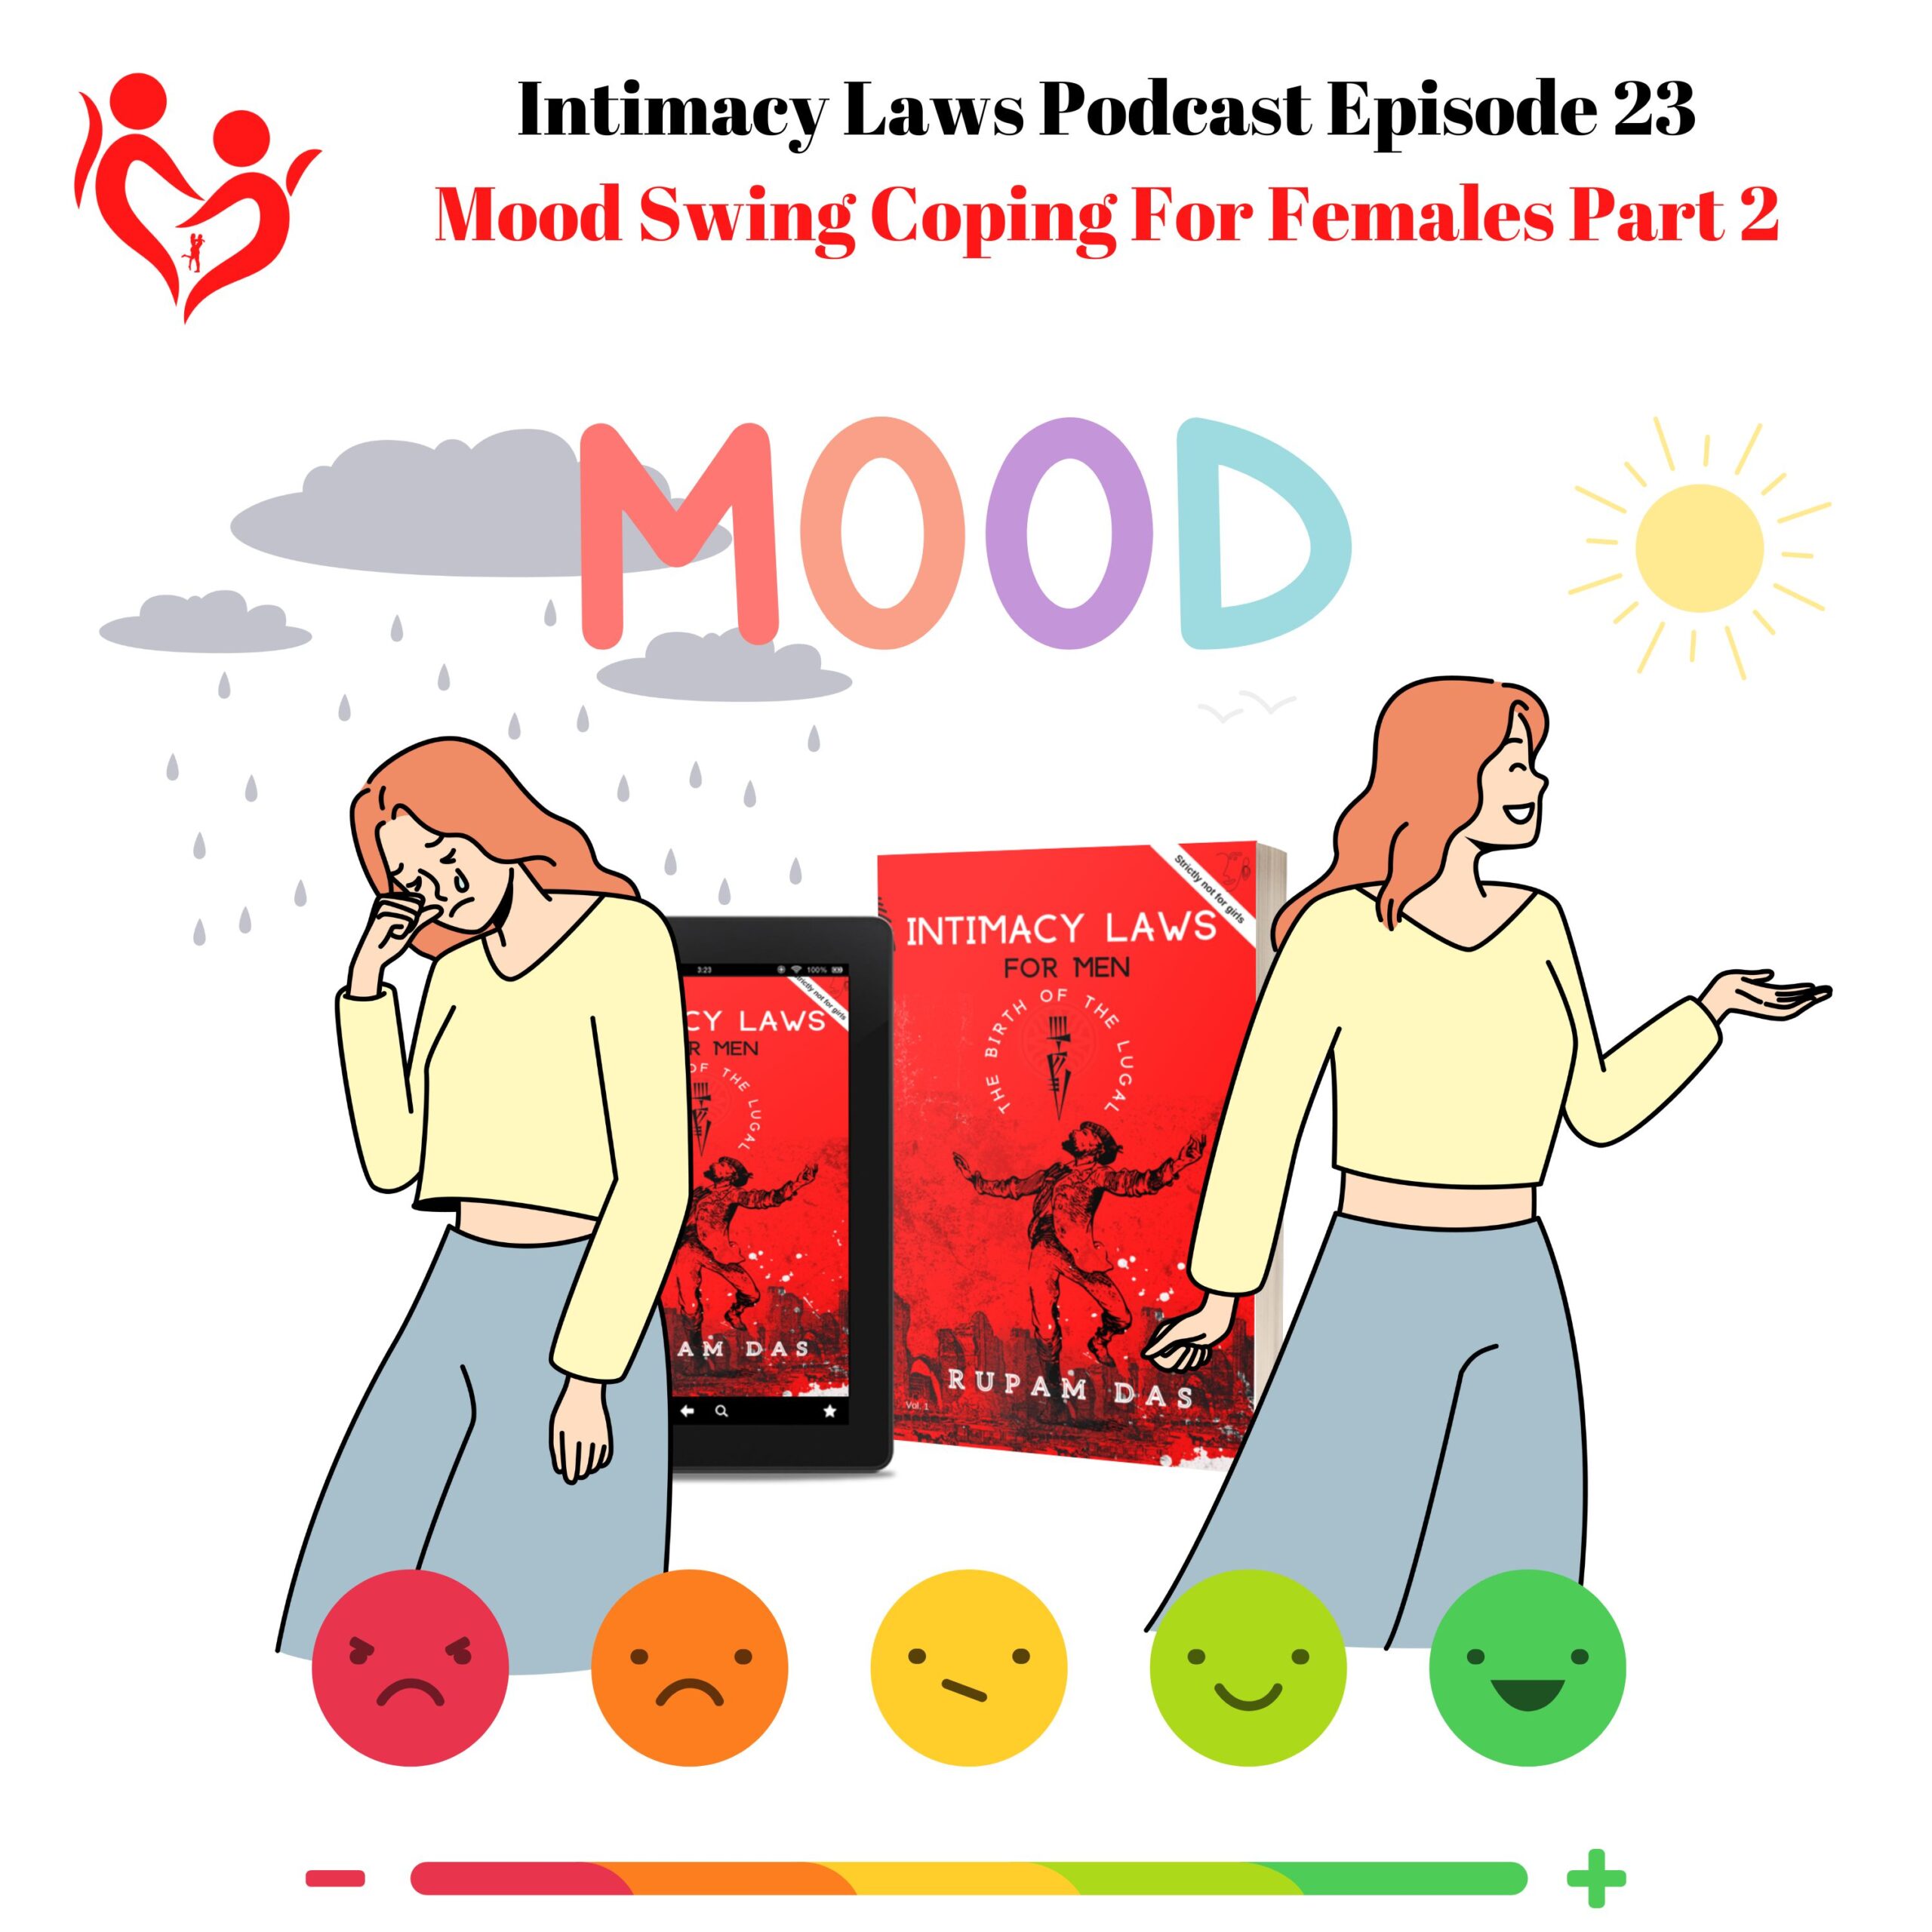 Intimacy Laws Podcast Episode 23 Mood Swing Coping For Females Part 2